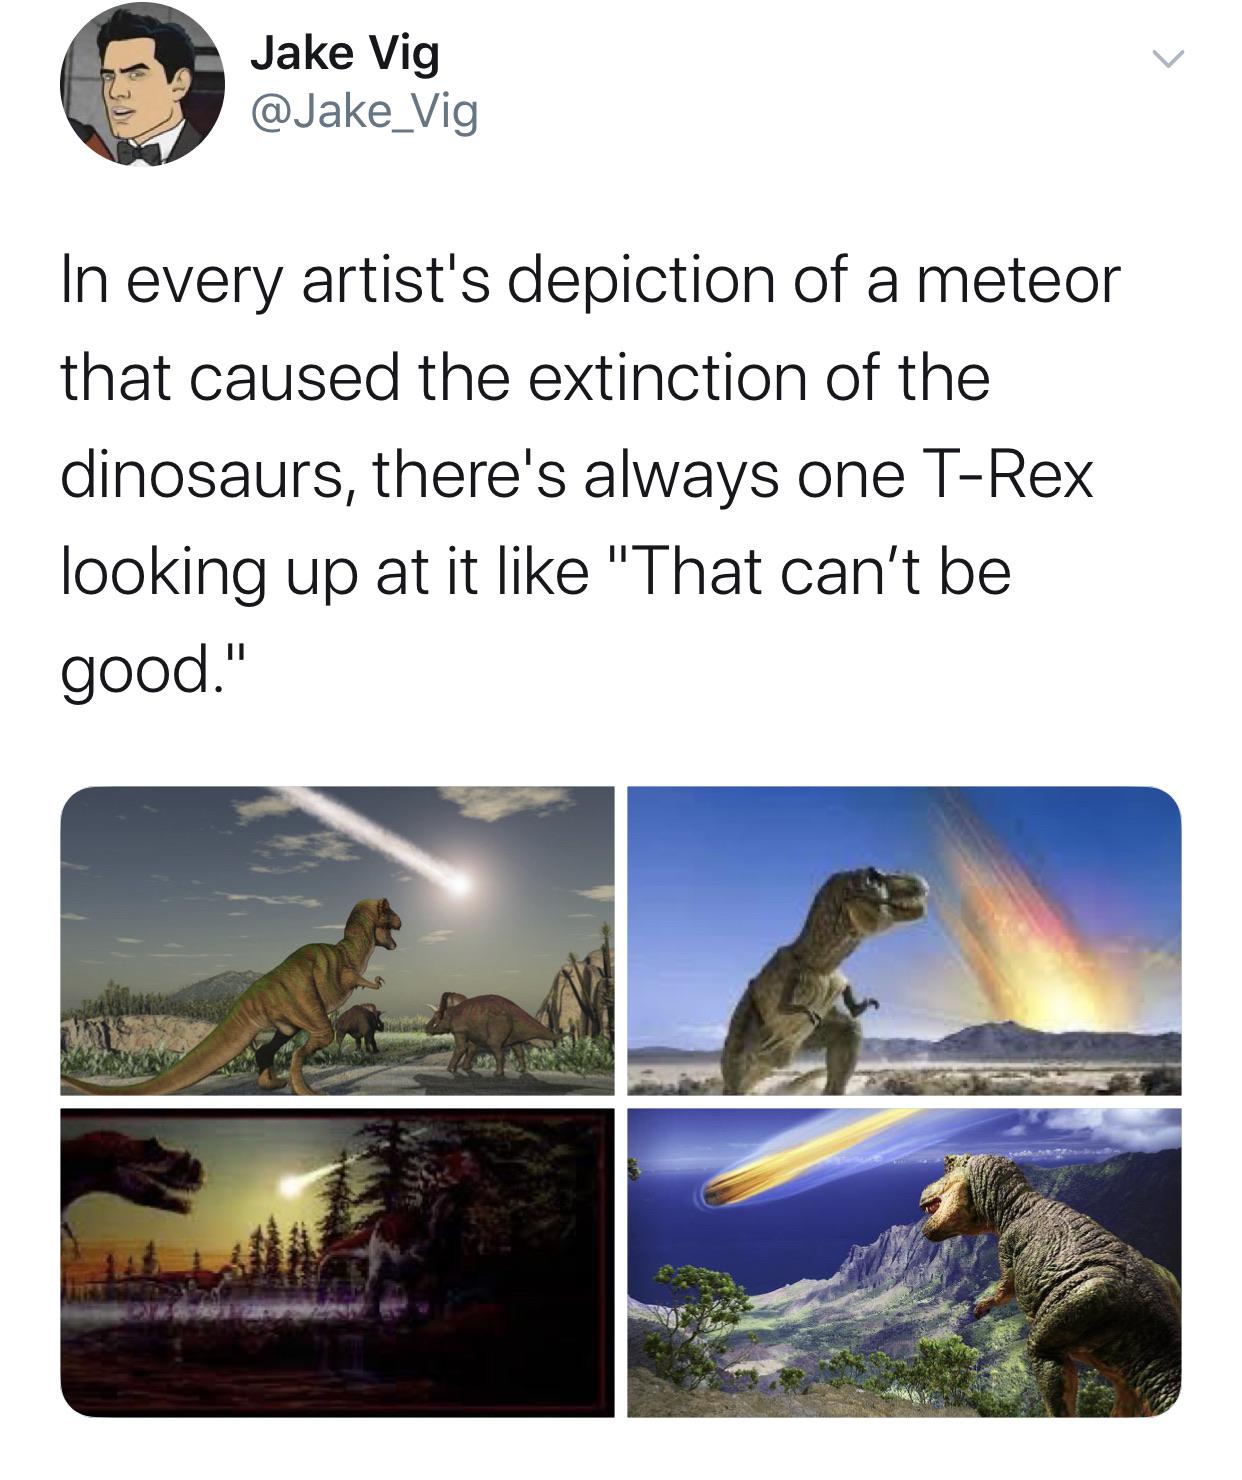 dinosaur aye bruh that shit looks kinda close - Jake Vig In every artist's depiction of a meteor that caused the extinction of the dinosaurs, there's always one TRex looking up at it "That can't be good."